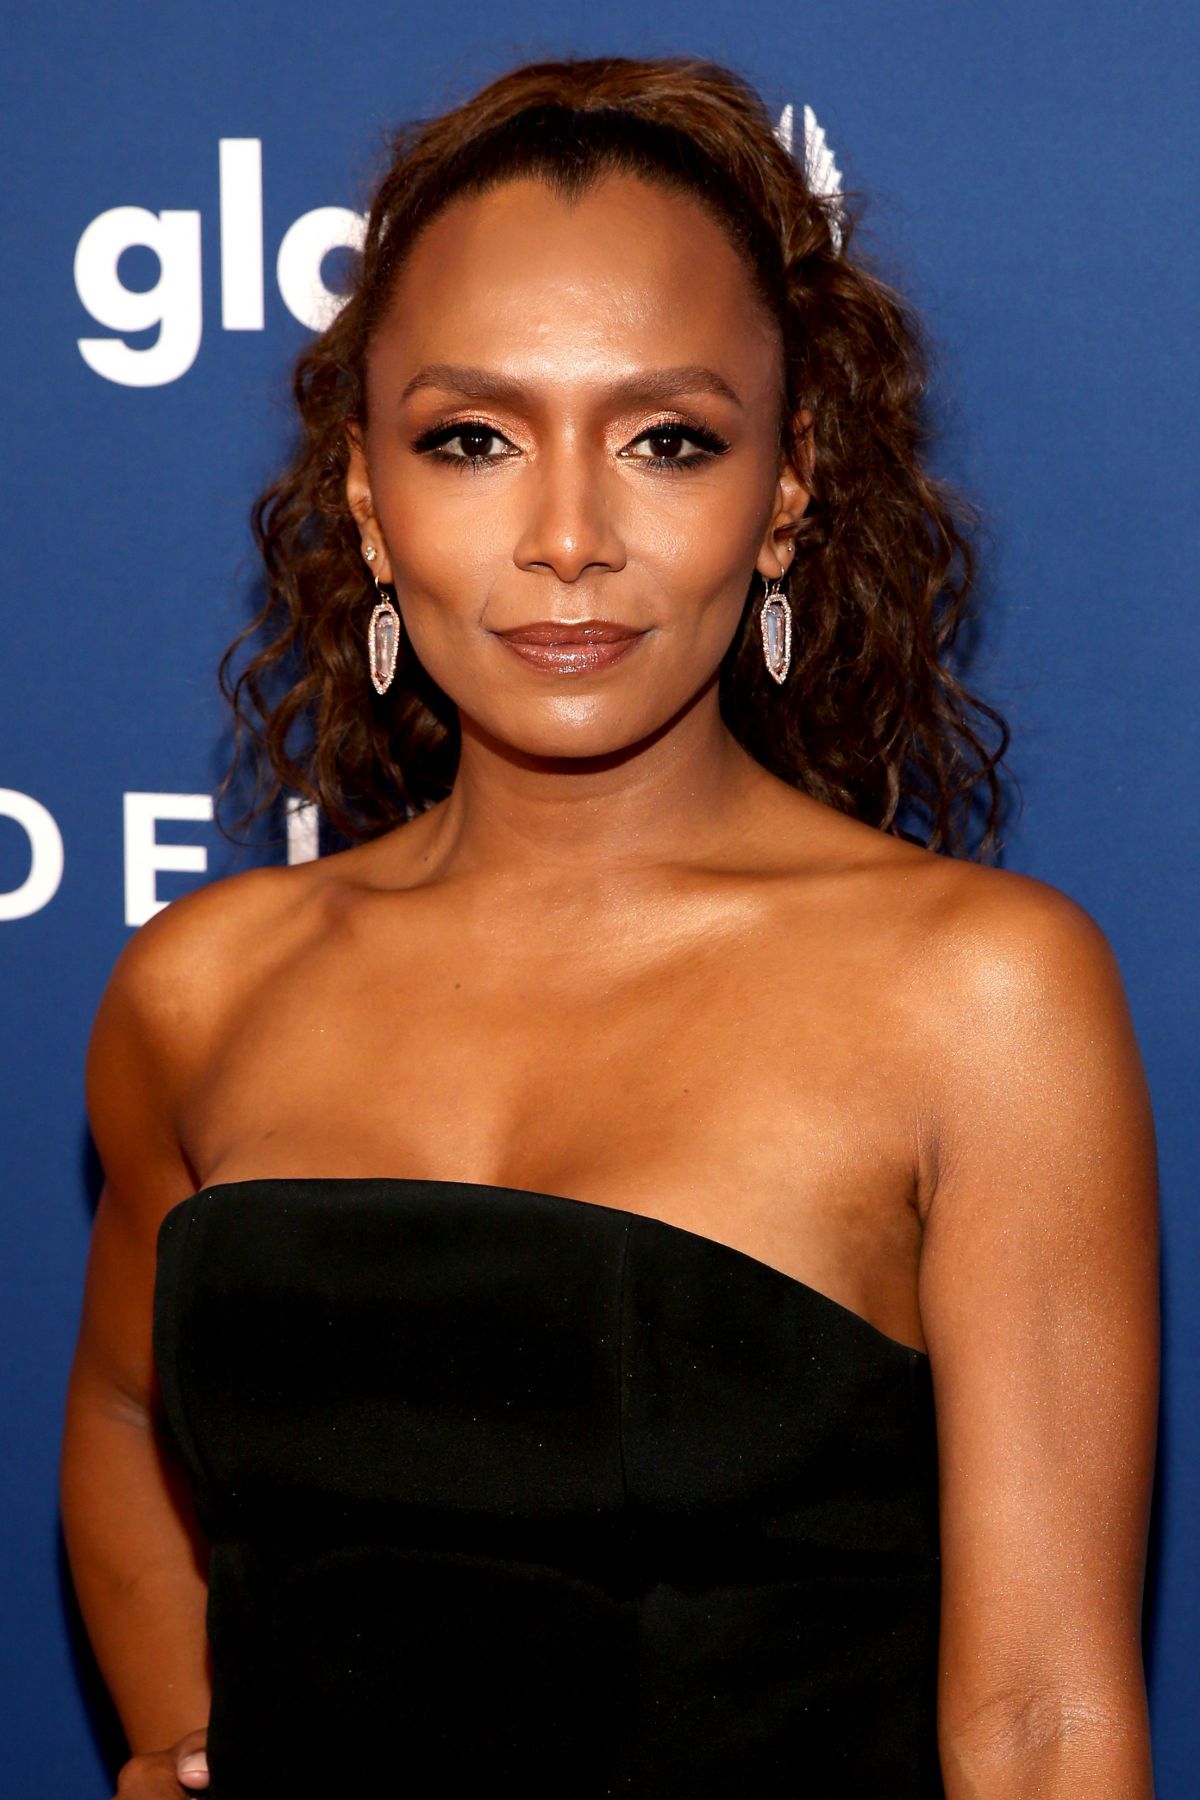 Download JANET MOCK at 2018 Glaad Media Awards in New York 05/05 ...